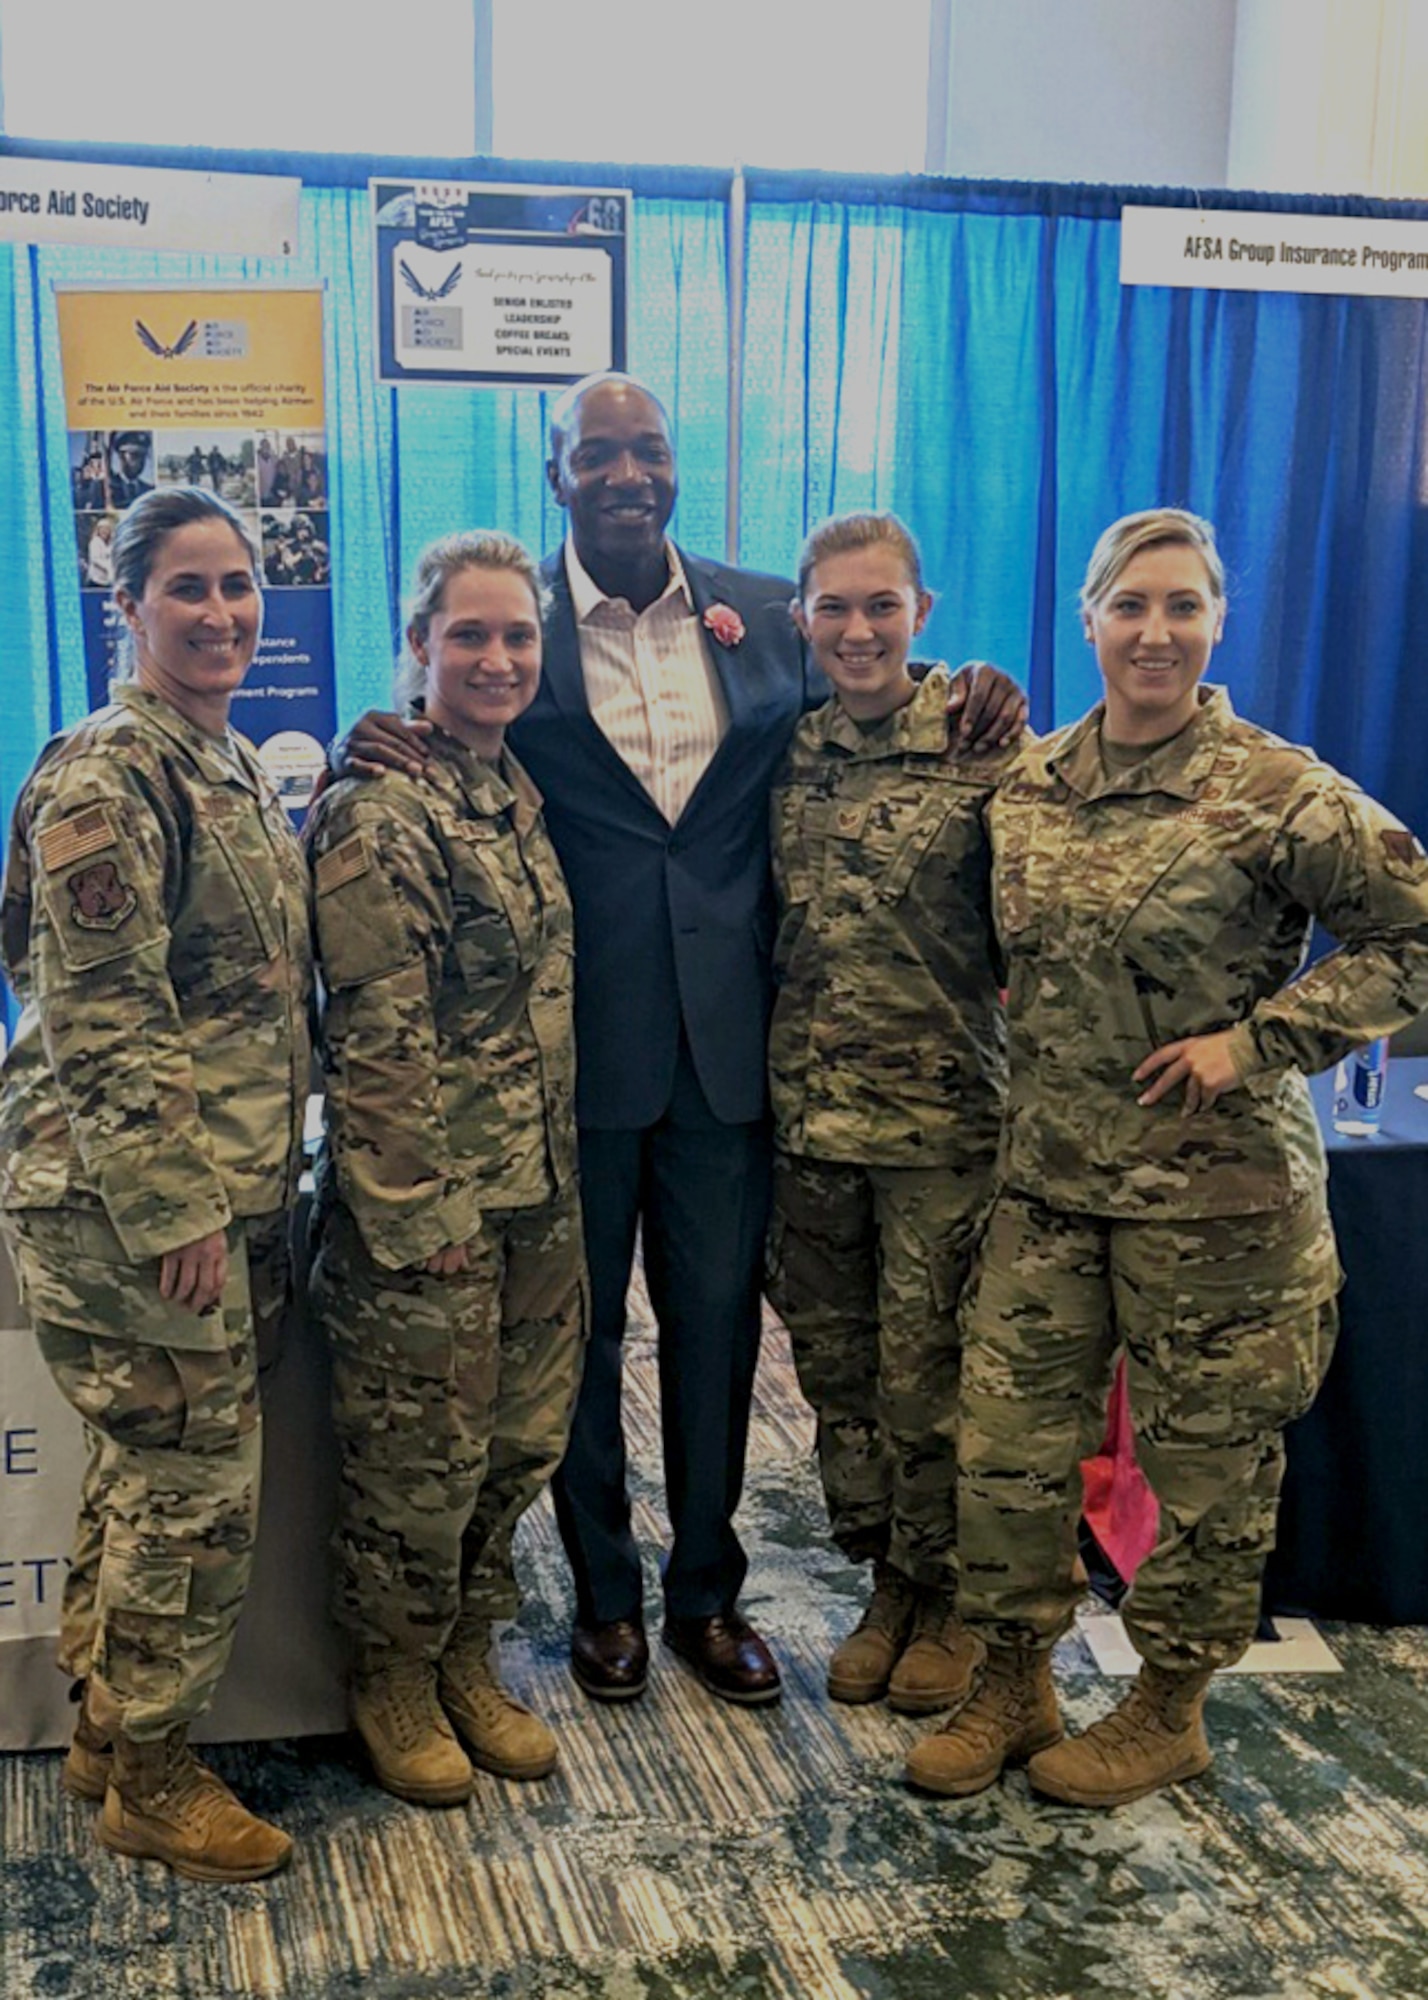 Chief Master Sgt. Laurice Souron, Master Sgt. Jennifer Hartwig, Tech. Sgt. Jaymie White, and Staff Sgt. Sara Kolinski pose for a photo with retired Command Chief Master Sgt. of the Air Force Kaleth O. Wright, 18th CMSAF, at the Air Force Sergeants Association Professional Education and Development Symposium July 26, 2021, in Orlando Florida.  During the symposium the 104th Fighter Wing members met with Air Force senior enlisted leaders and discussed ways that the Air and Space Forces plan to accelerate change.  (U.S. Air National Guard courtesy photo)